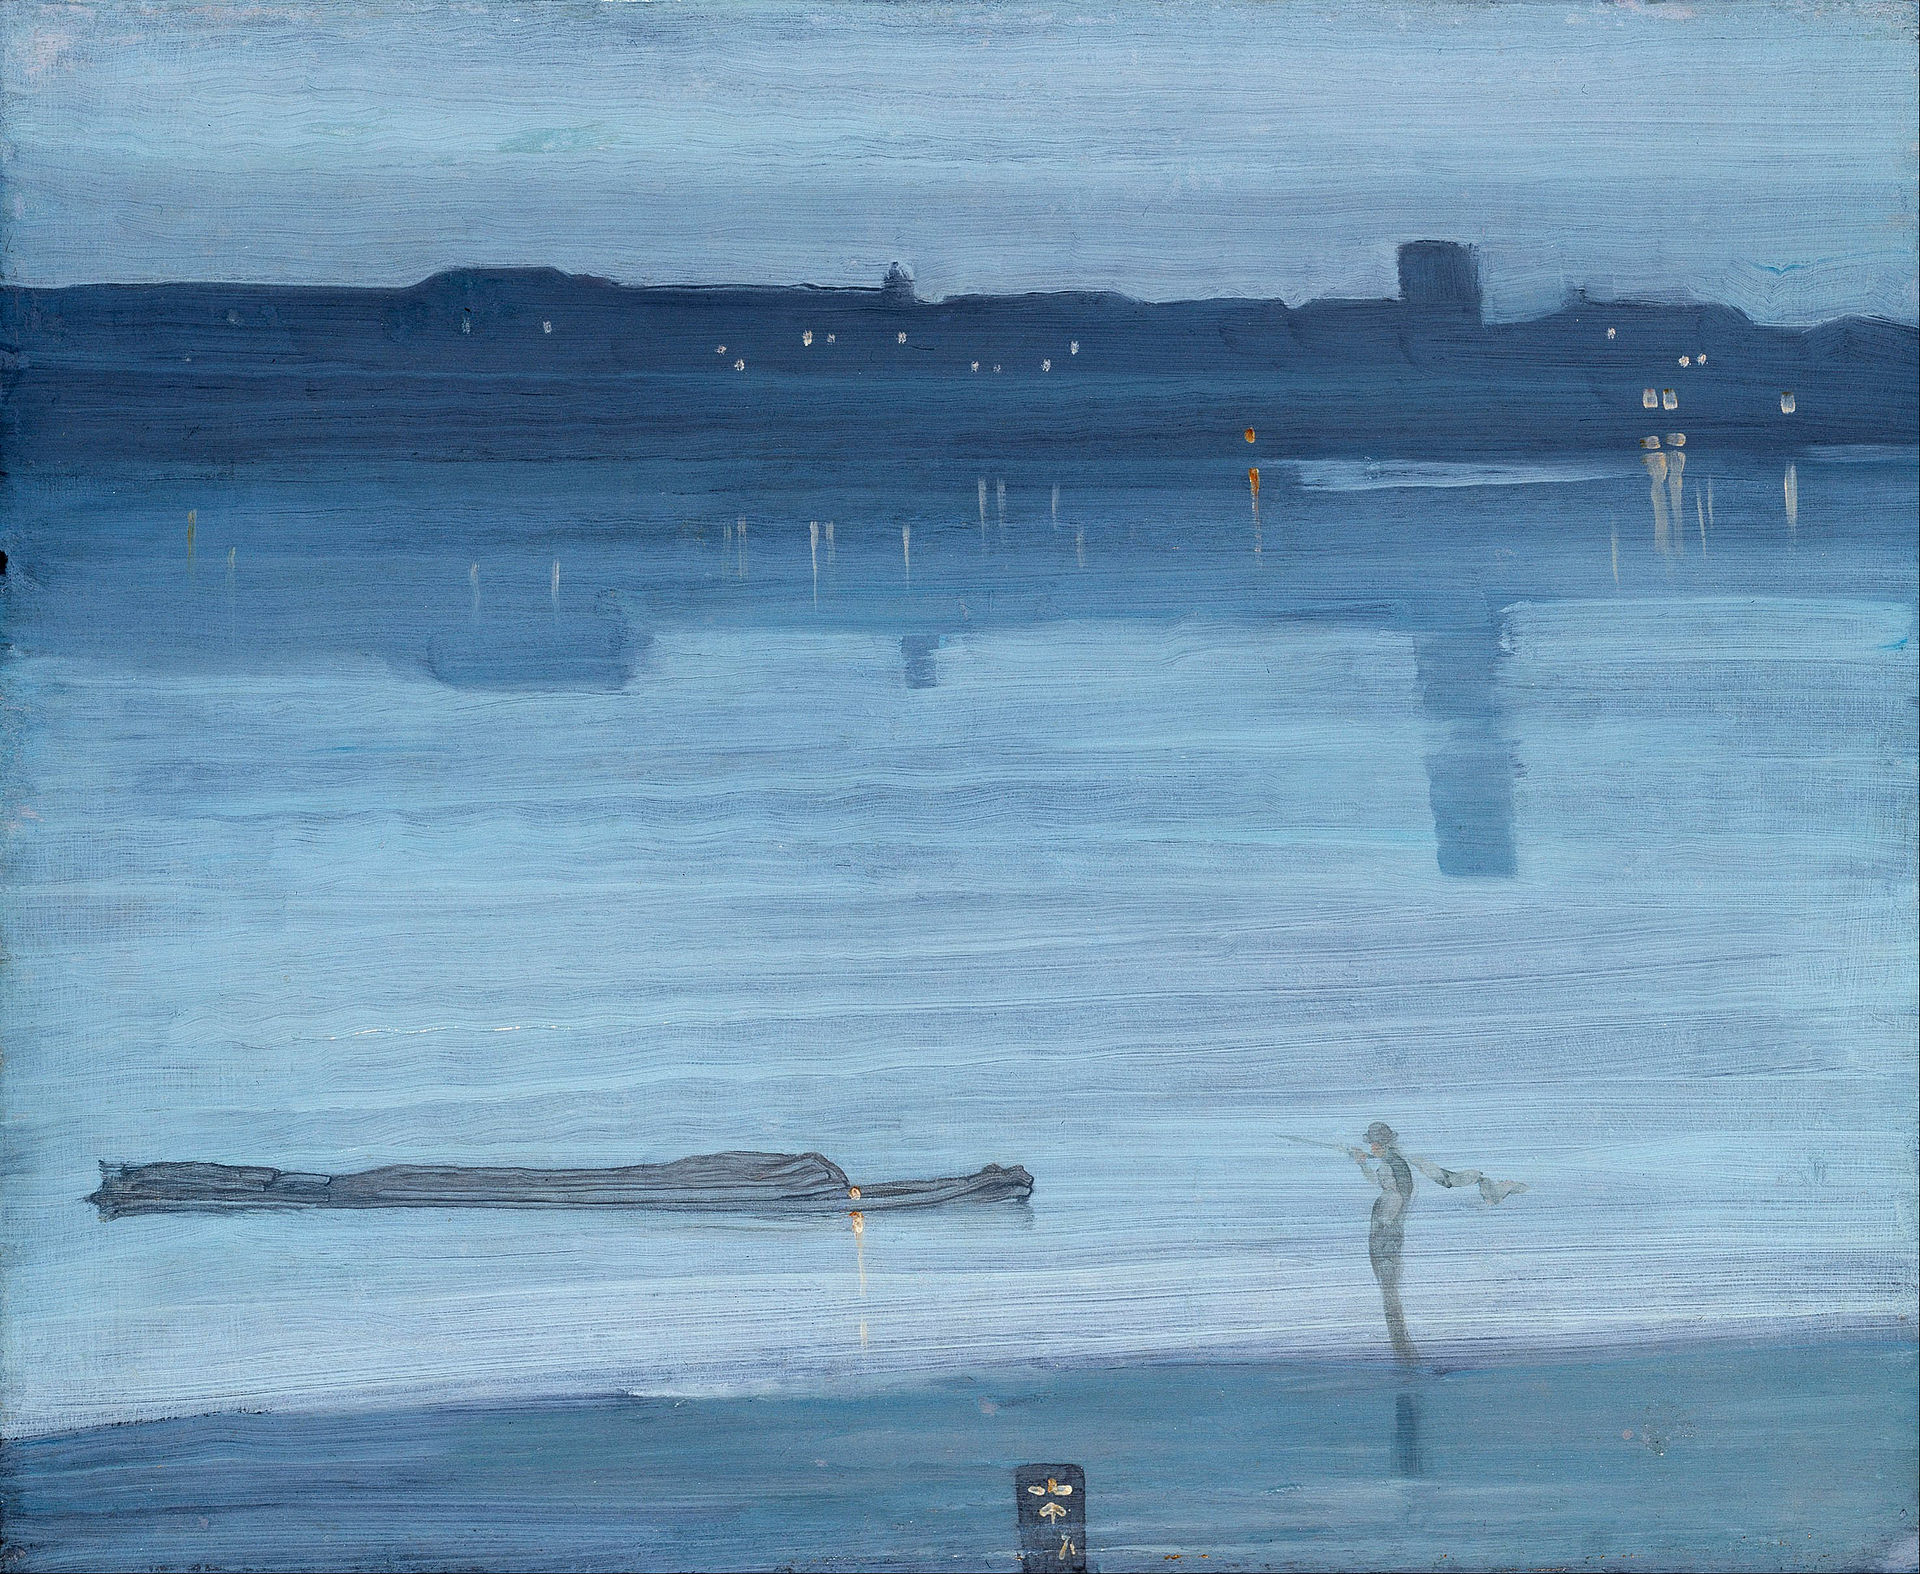 Nocturne: Blue and Silver - Chelsea by James Abbott McNeill Whistler - 1871 - 60.8 x 50.2 cm Tate Modern